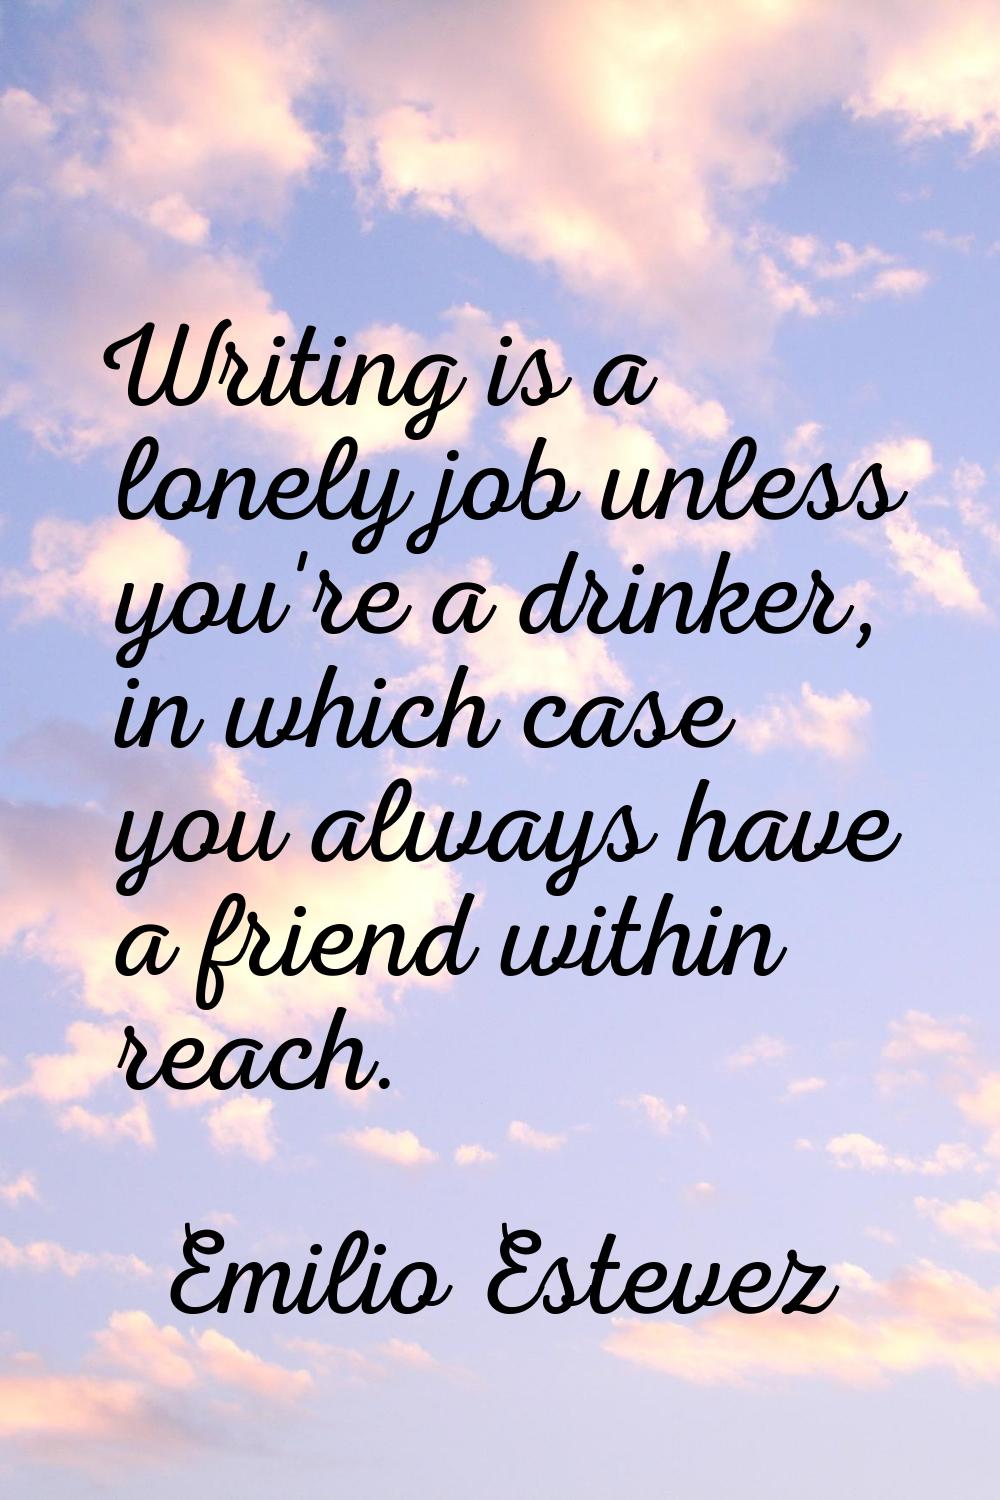 Writing is a lonely job unless you're a drinker, in which case you always have a friend within reac